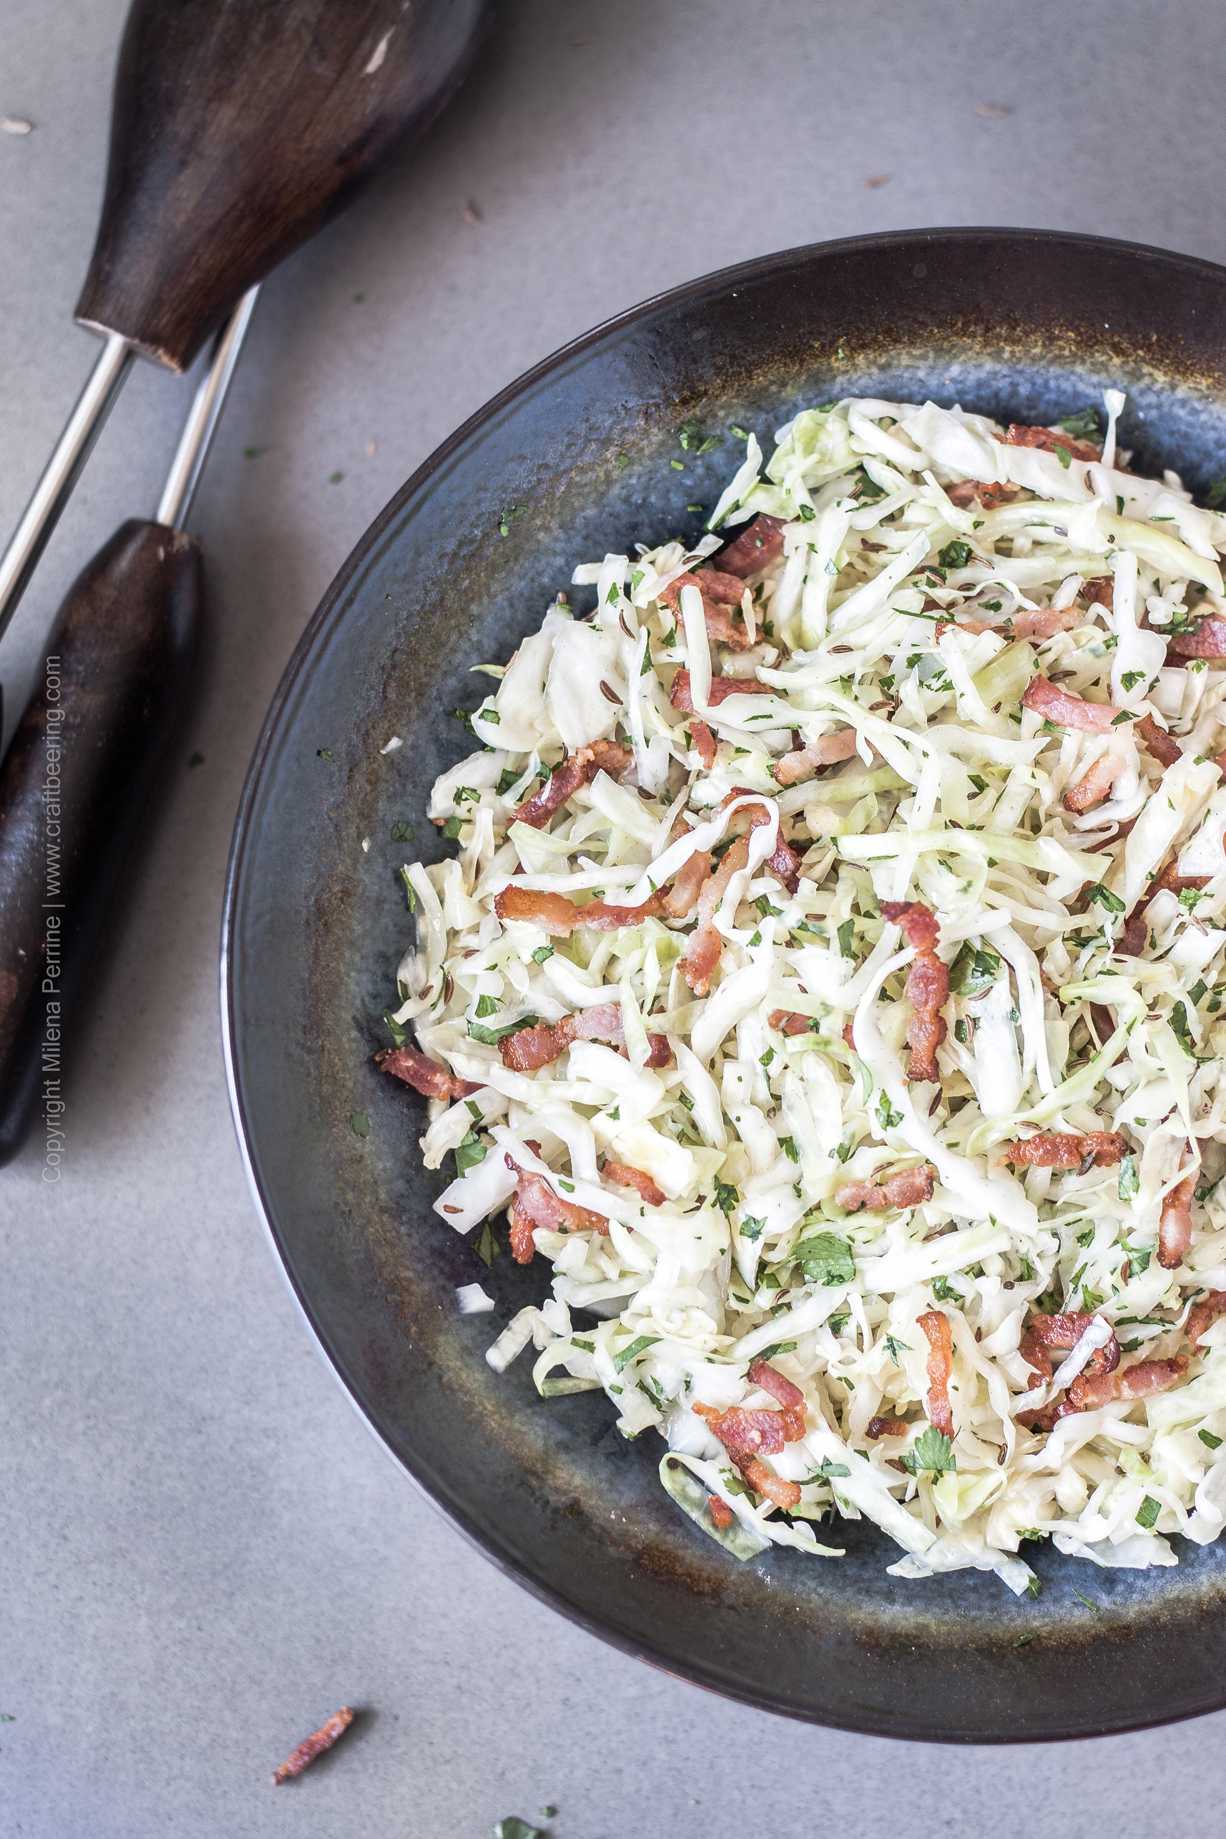 German coleslaw with white cabbage and bacon (weisskrautsalat) and caraway seed.